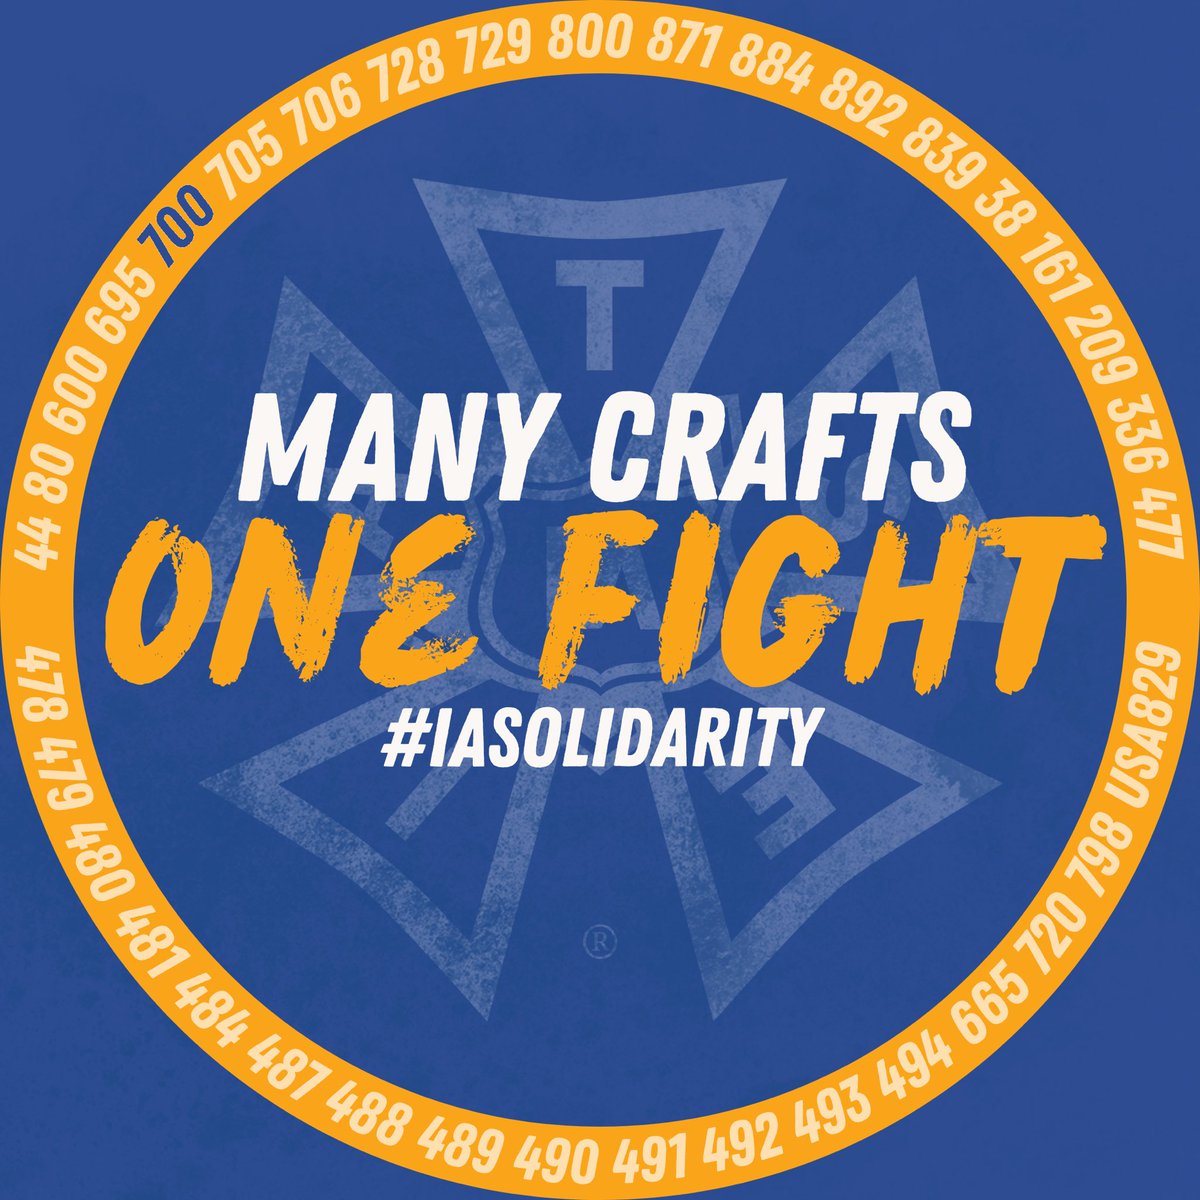 “I back our @MPEG700 and @IATSE bargaining teams pushing for a fair contract! #ManyCraftsOneFight #IAsolidarity”